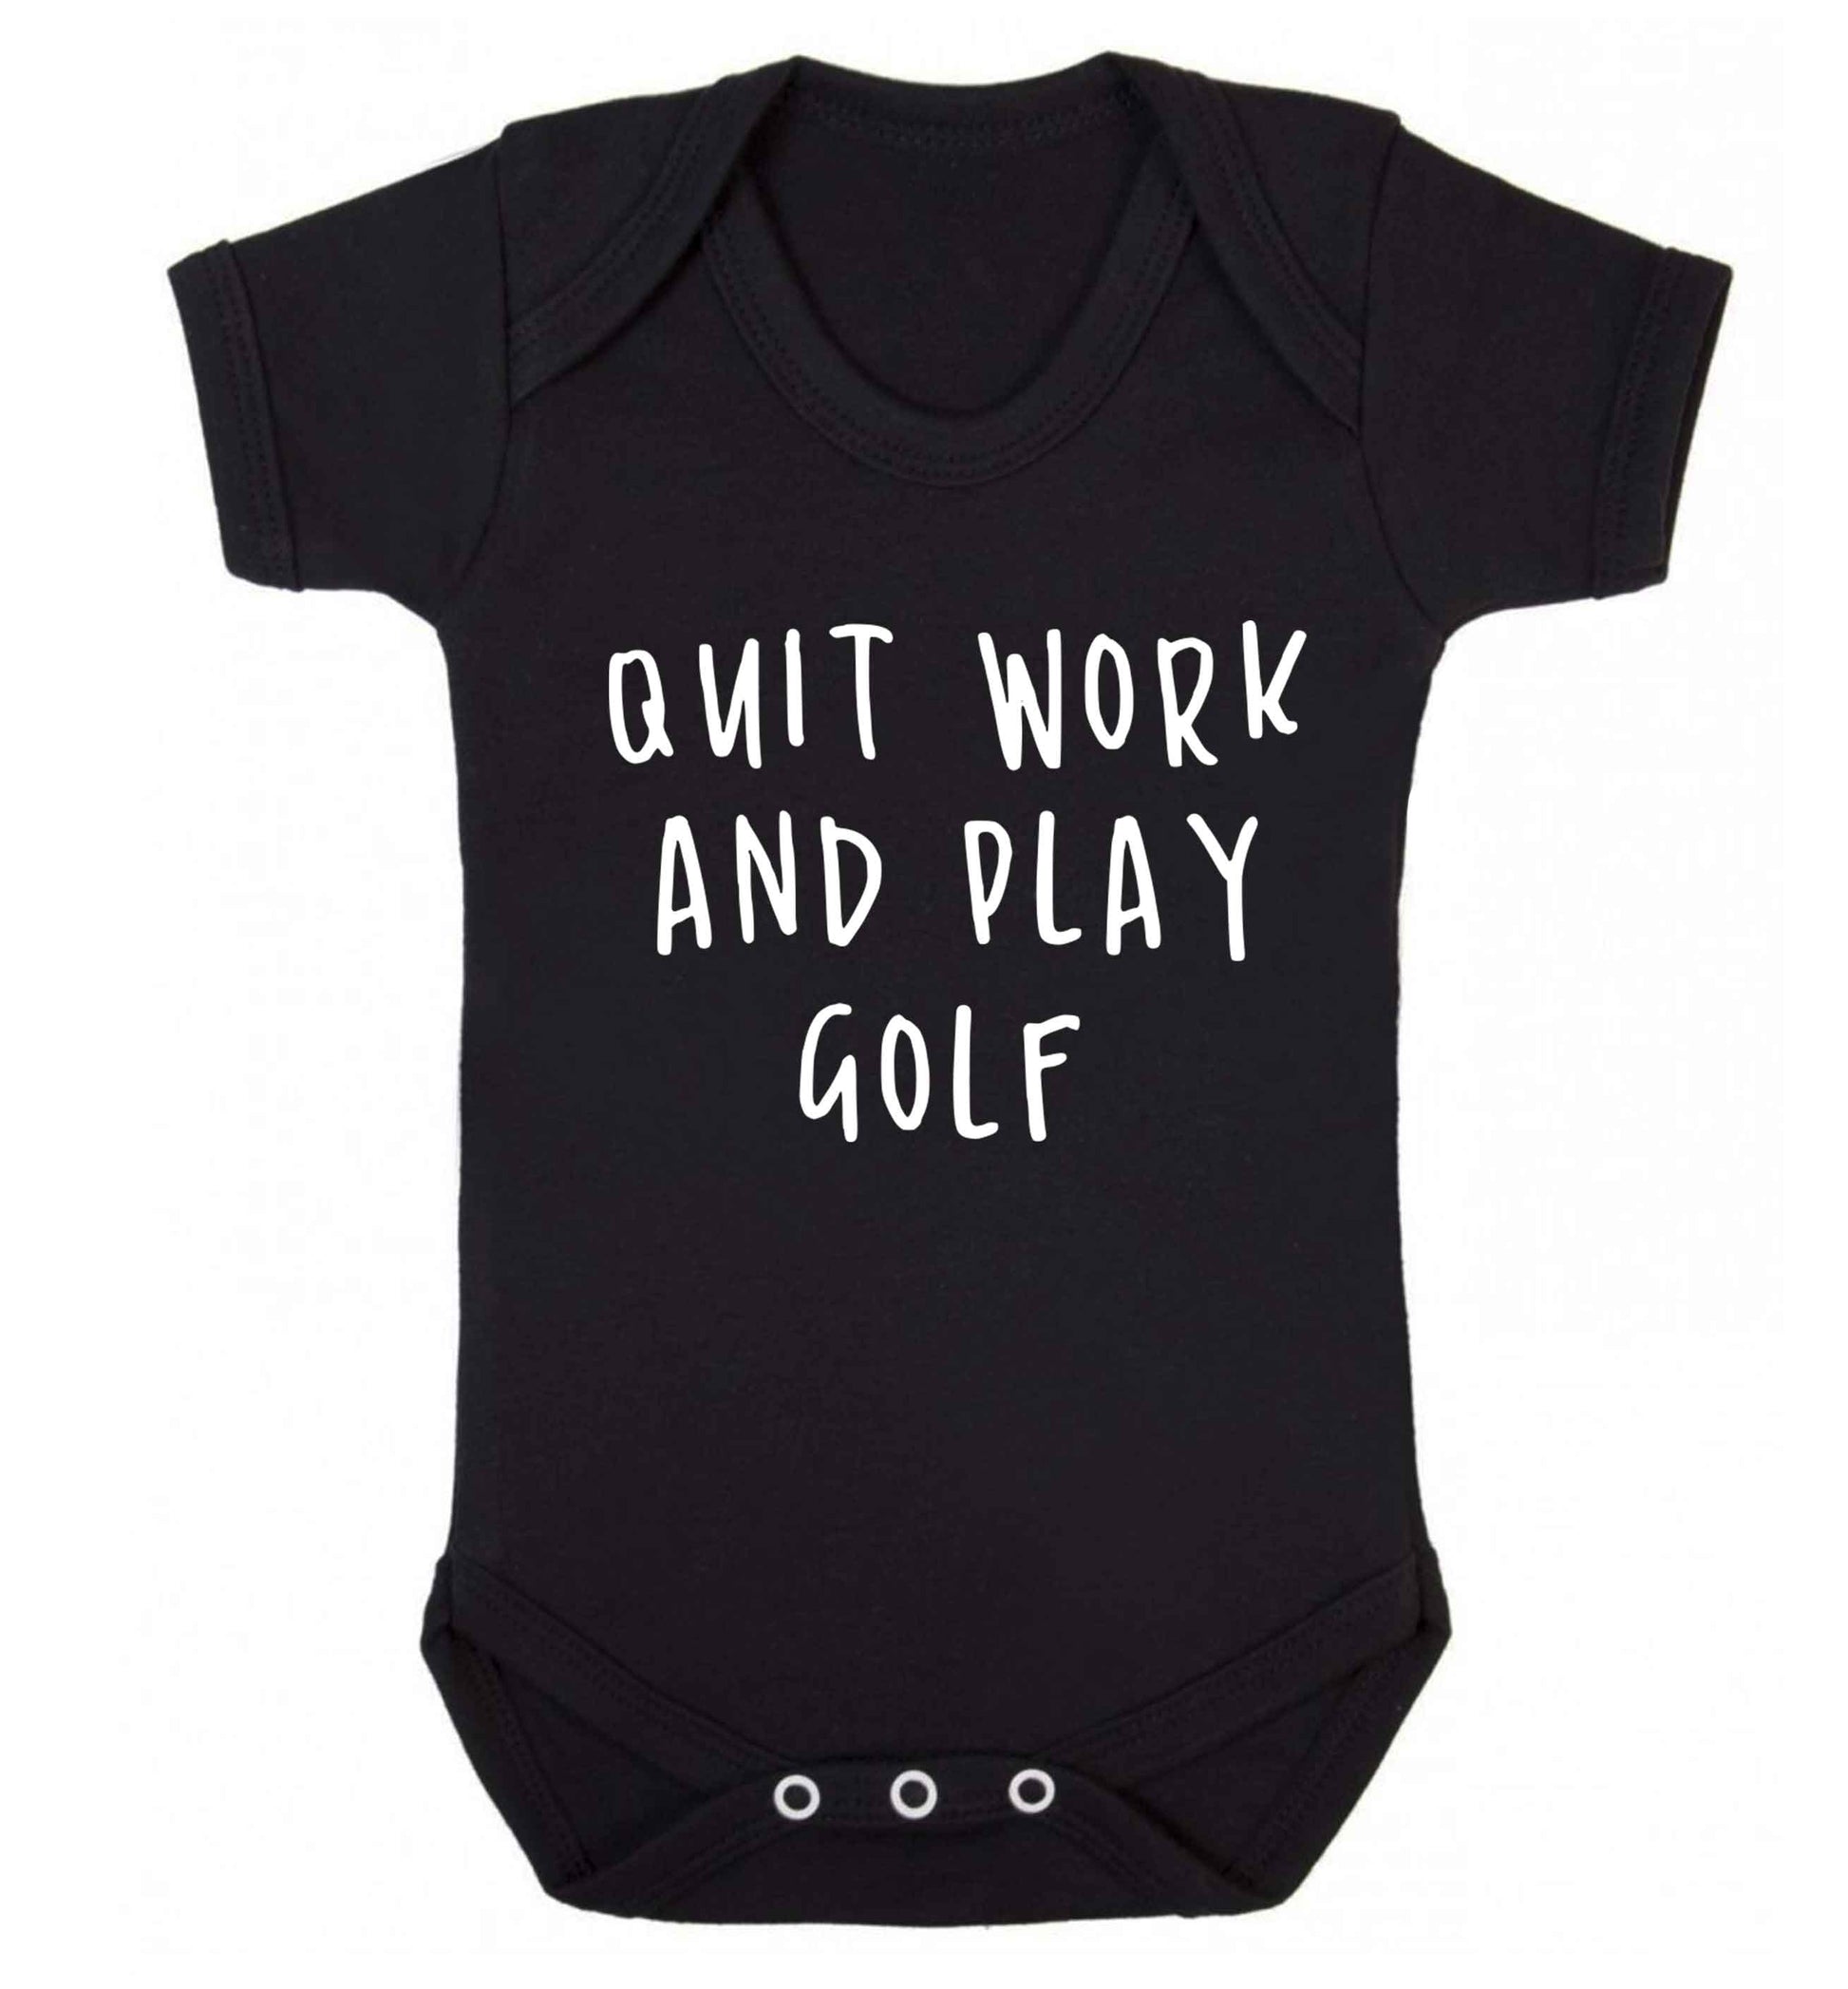 Quit work and play golf Baby Vest black 18-24 months